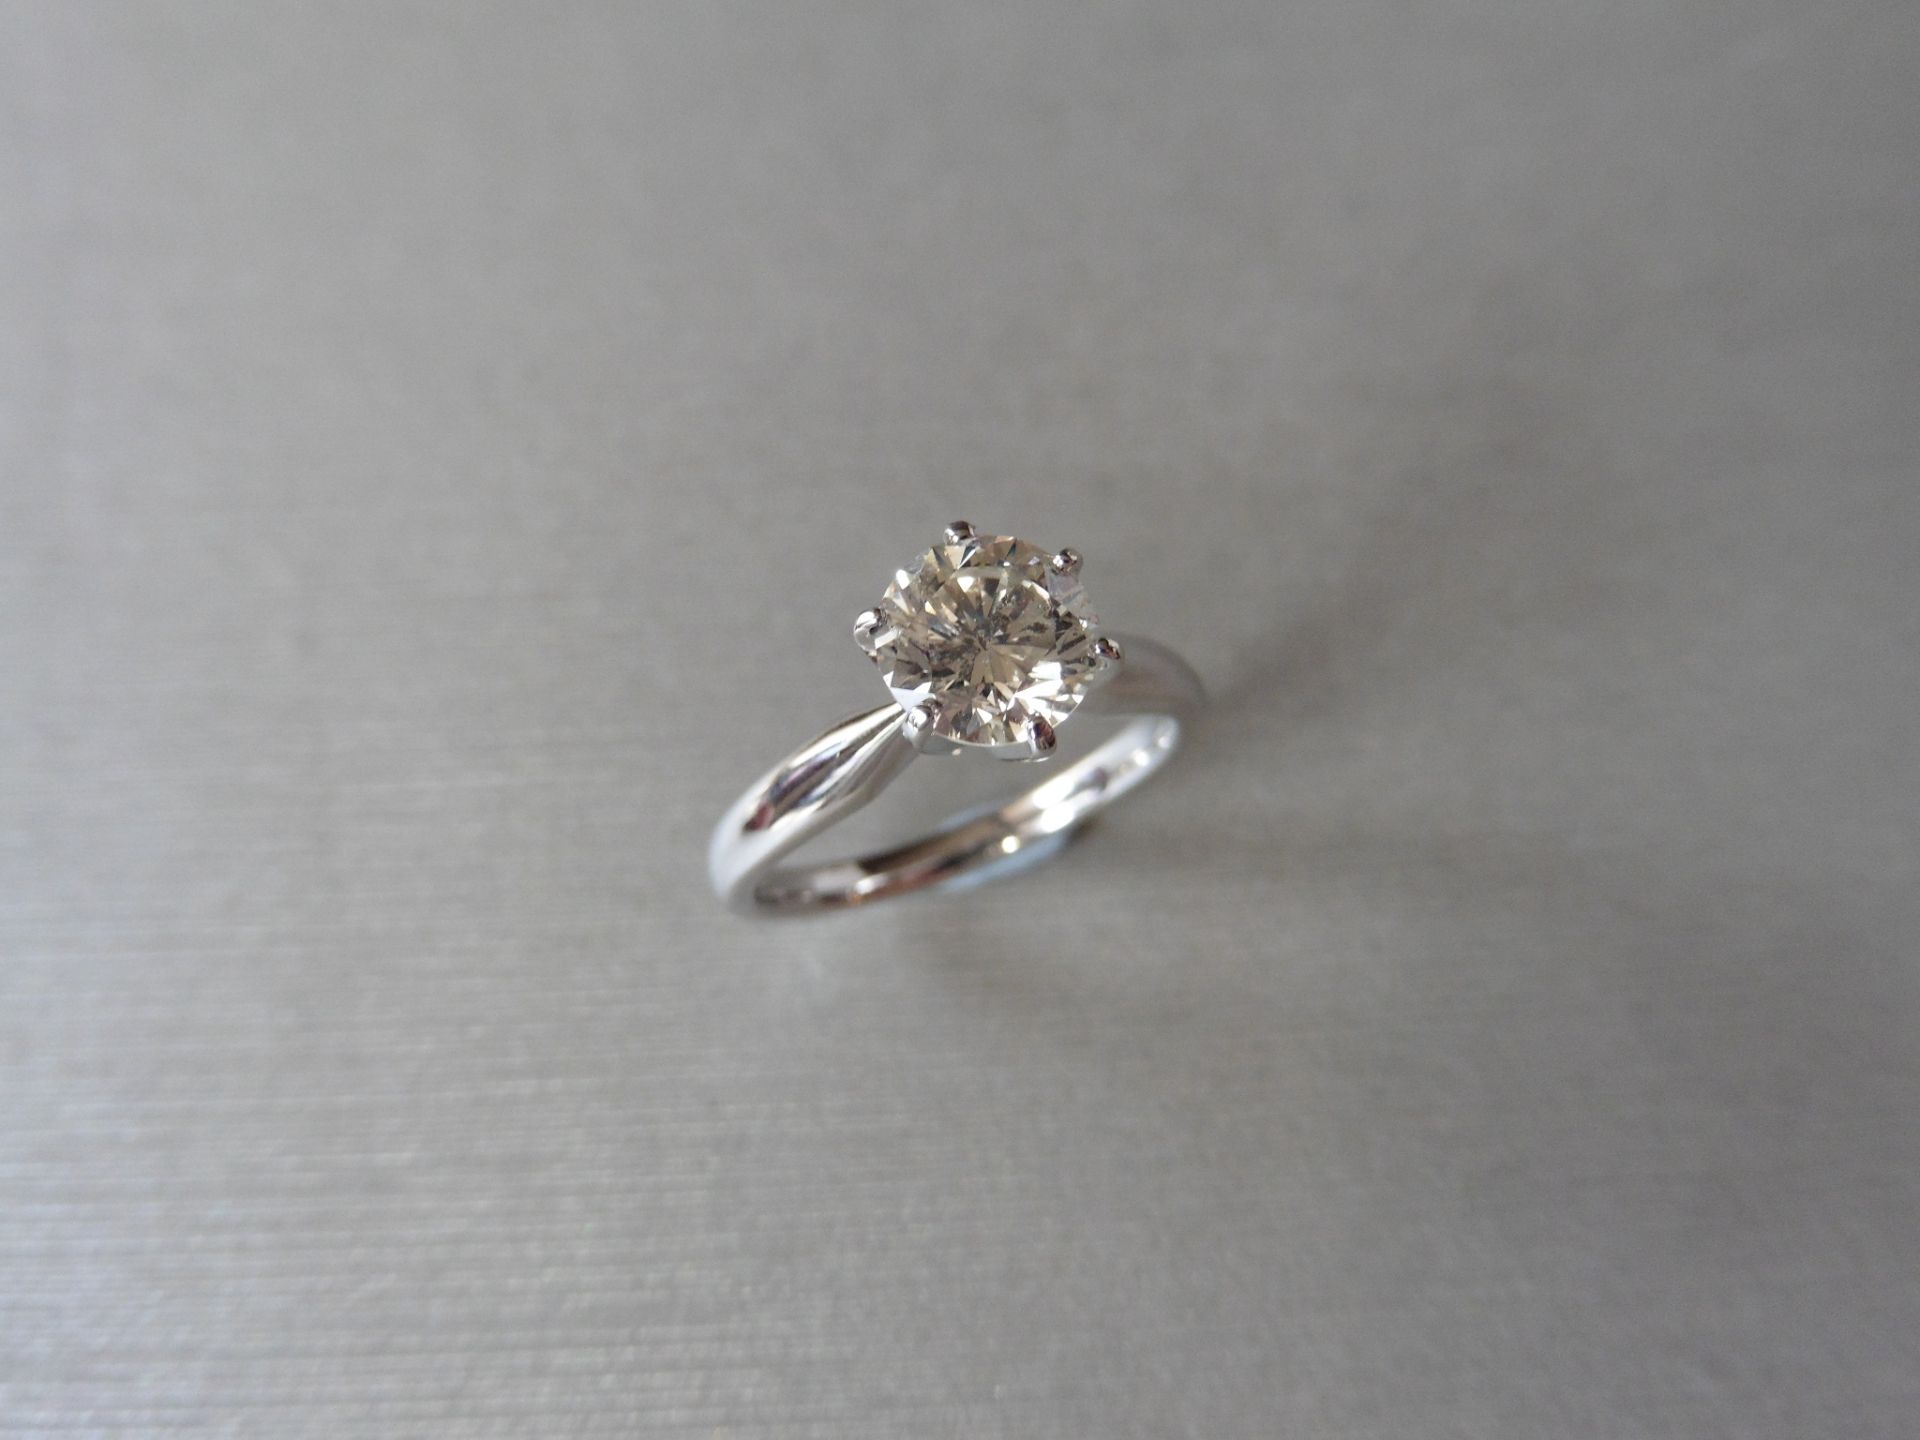 1.07ct diamond solitaire ring set in platinum 950. J colour and I1 clarity. 6 claw setting. Size N